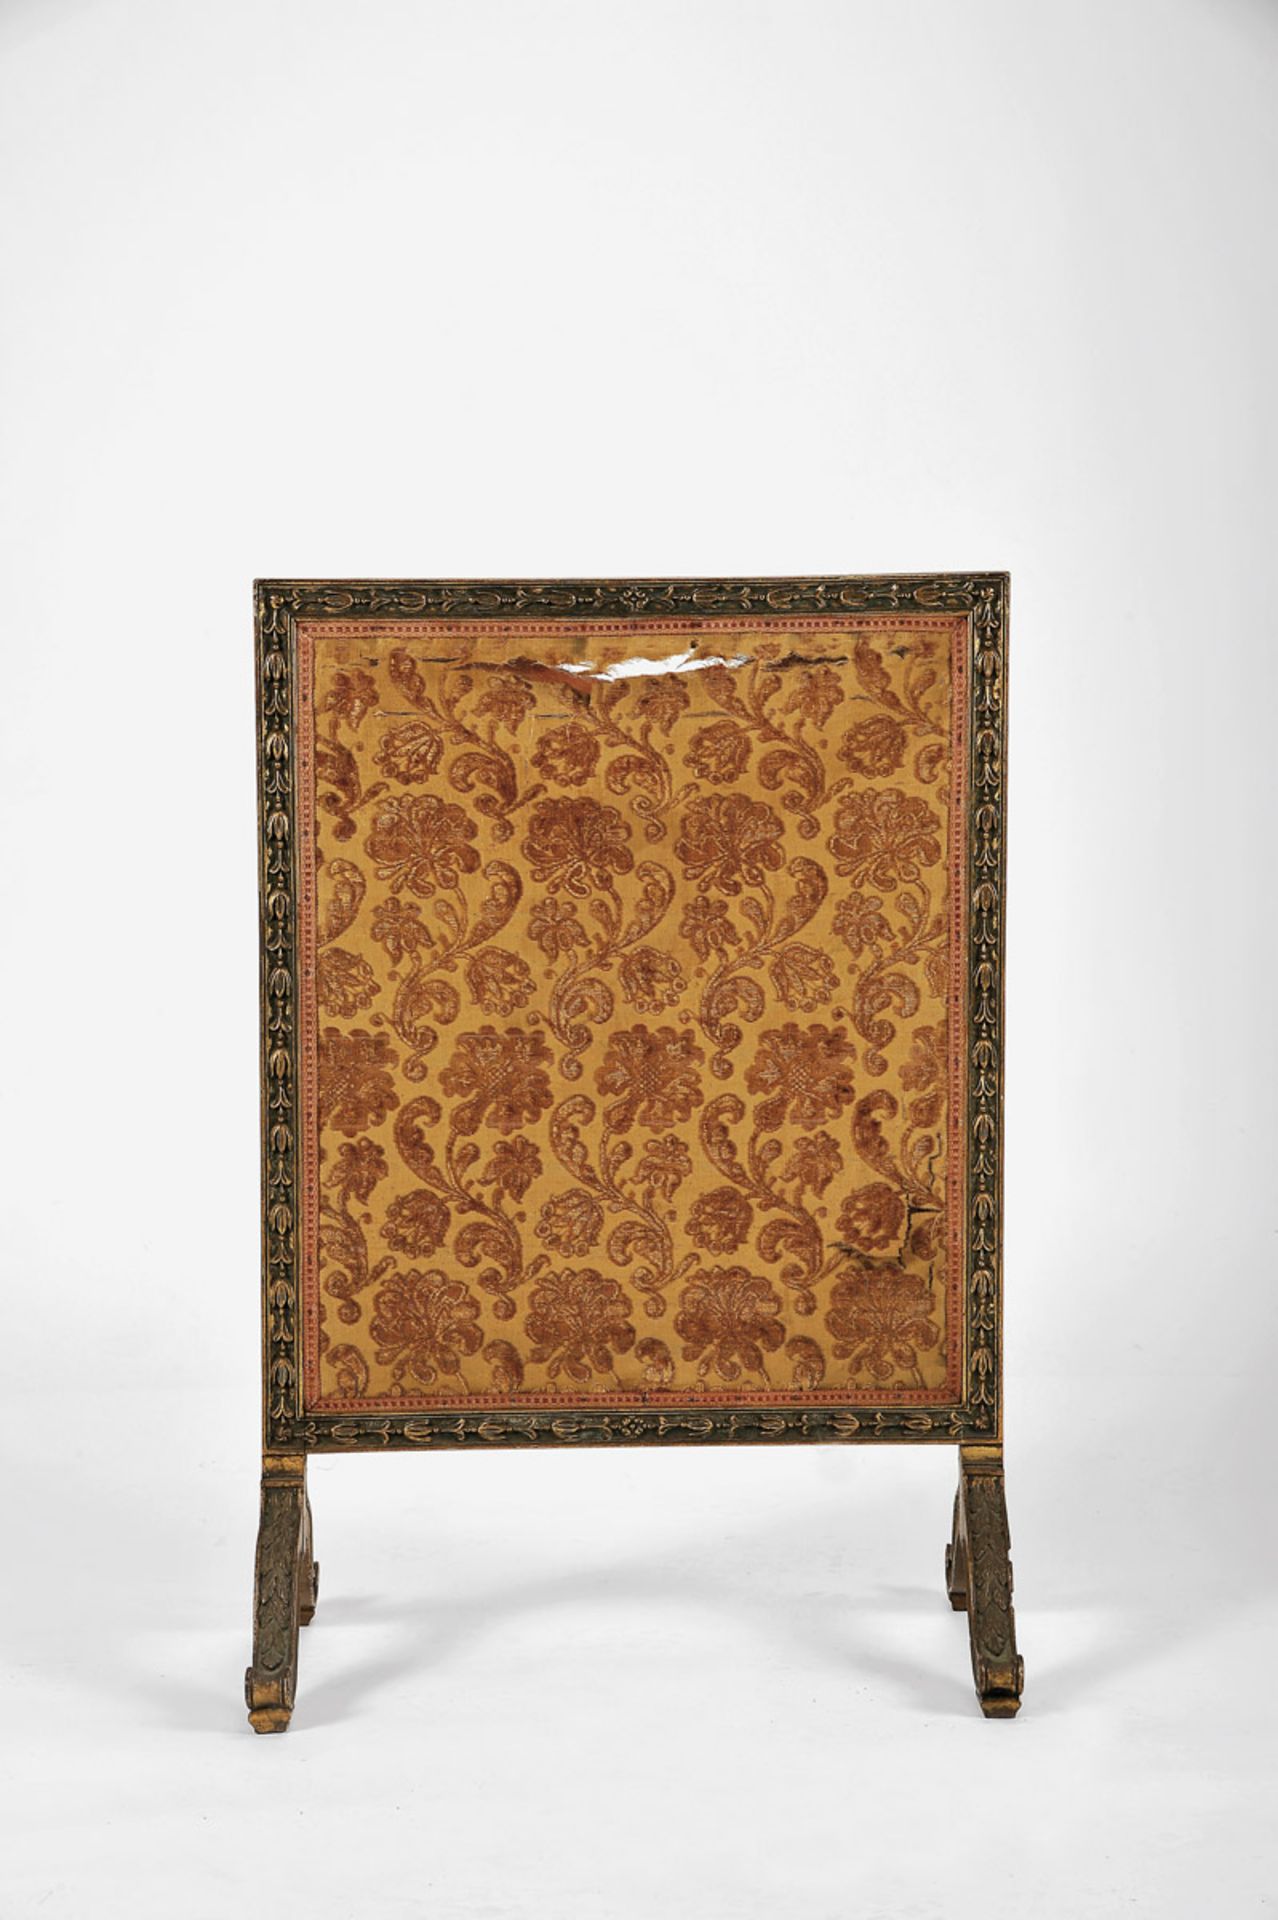 A Fire Screen, Napoleon III, carved and gilt wood, Brocade velvet centre, French, 19th C. (2nd